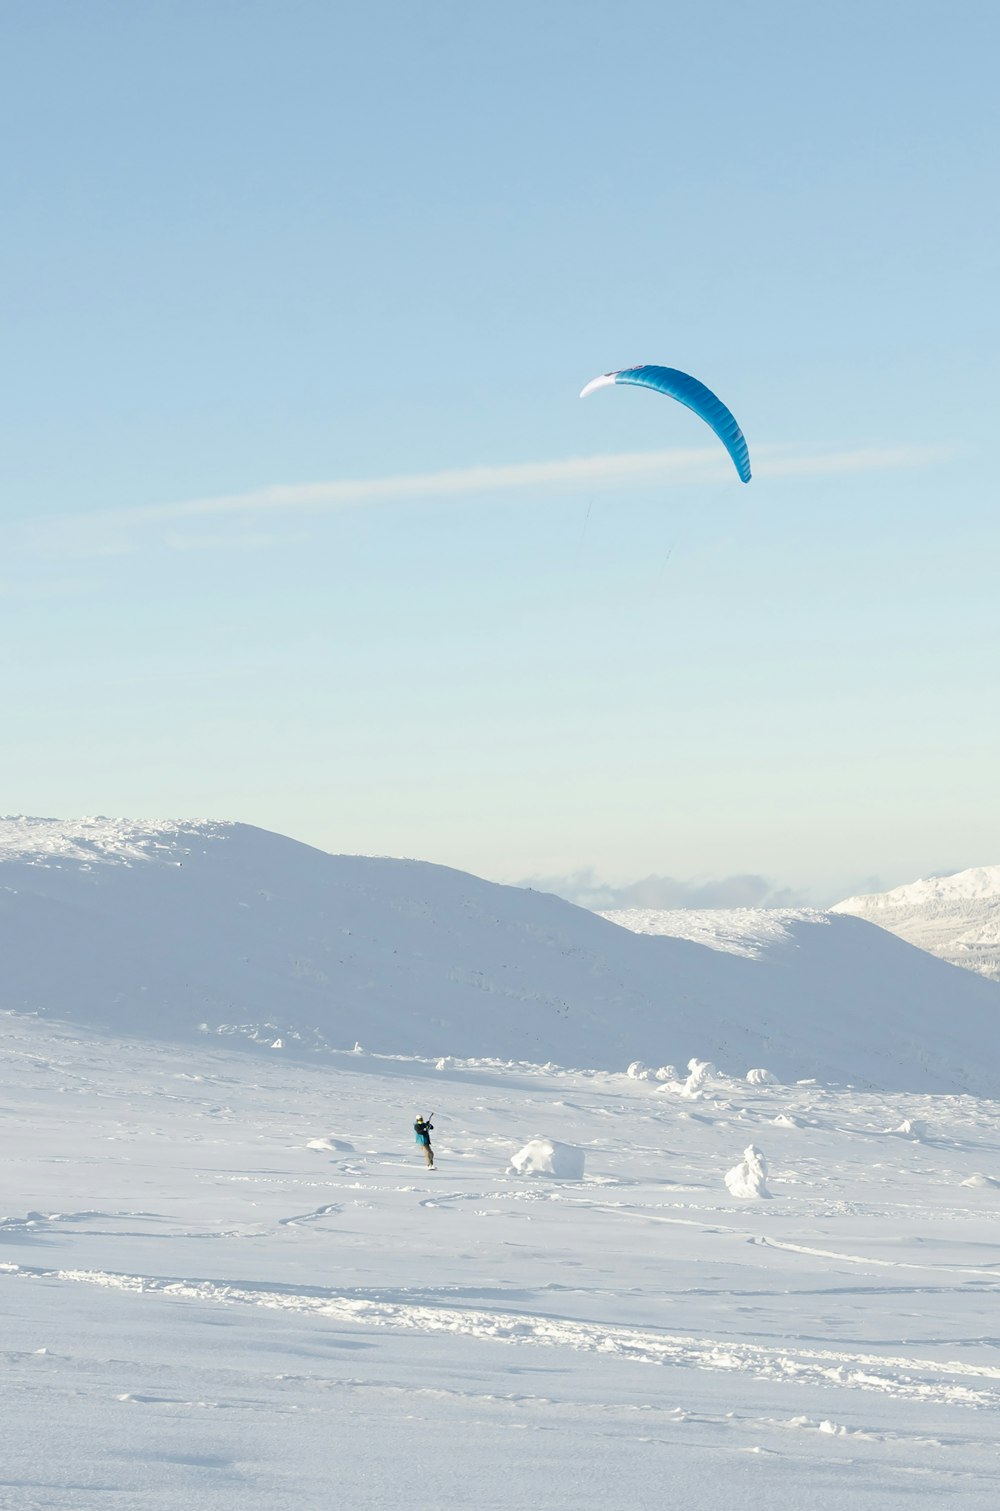 a person is flying a kite in the snow